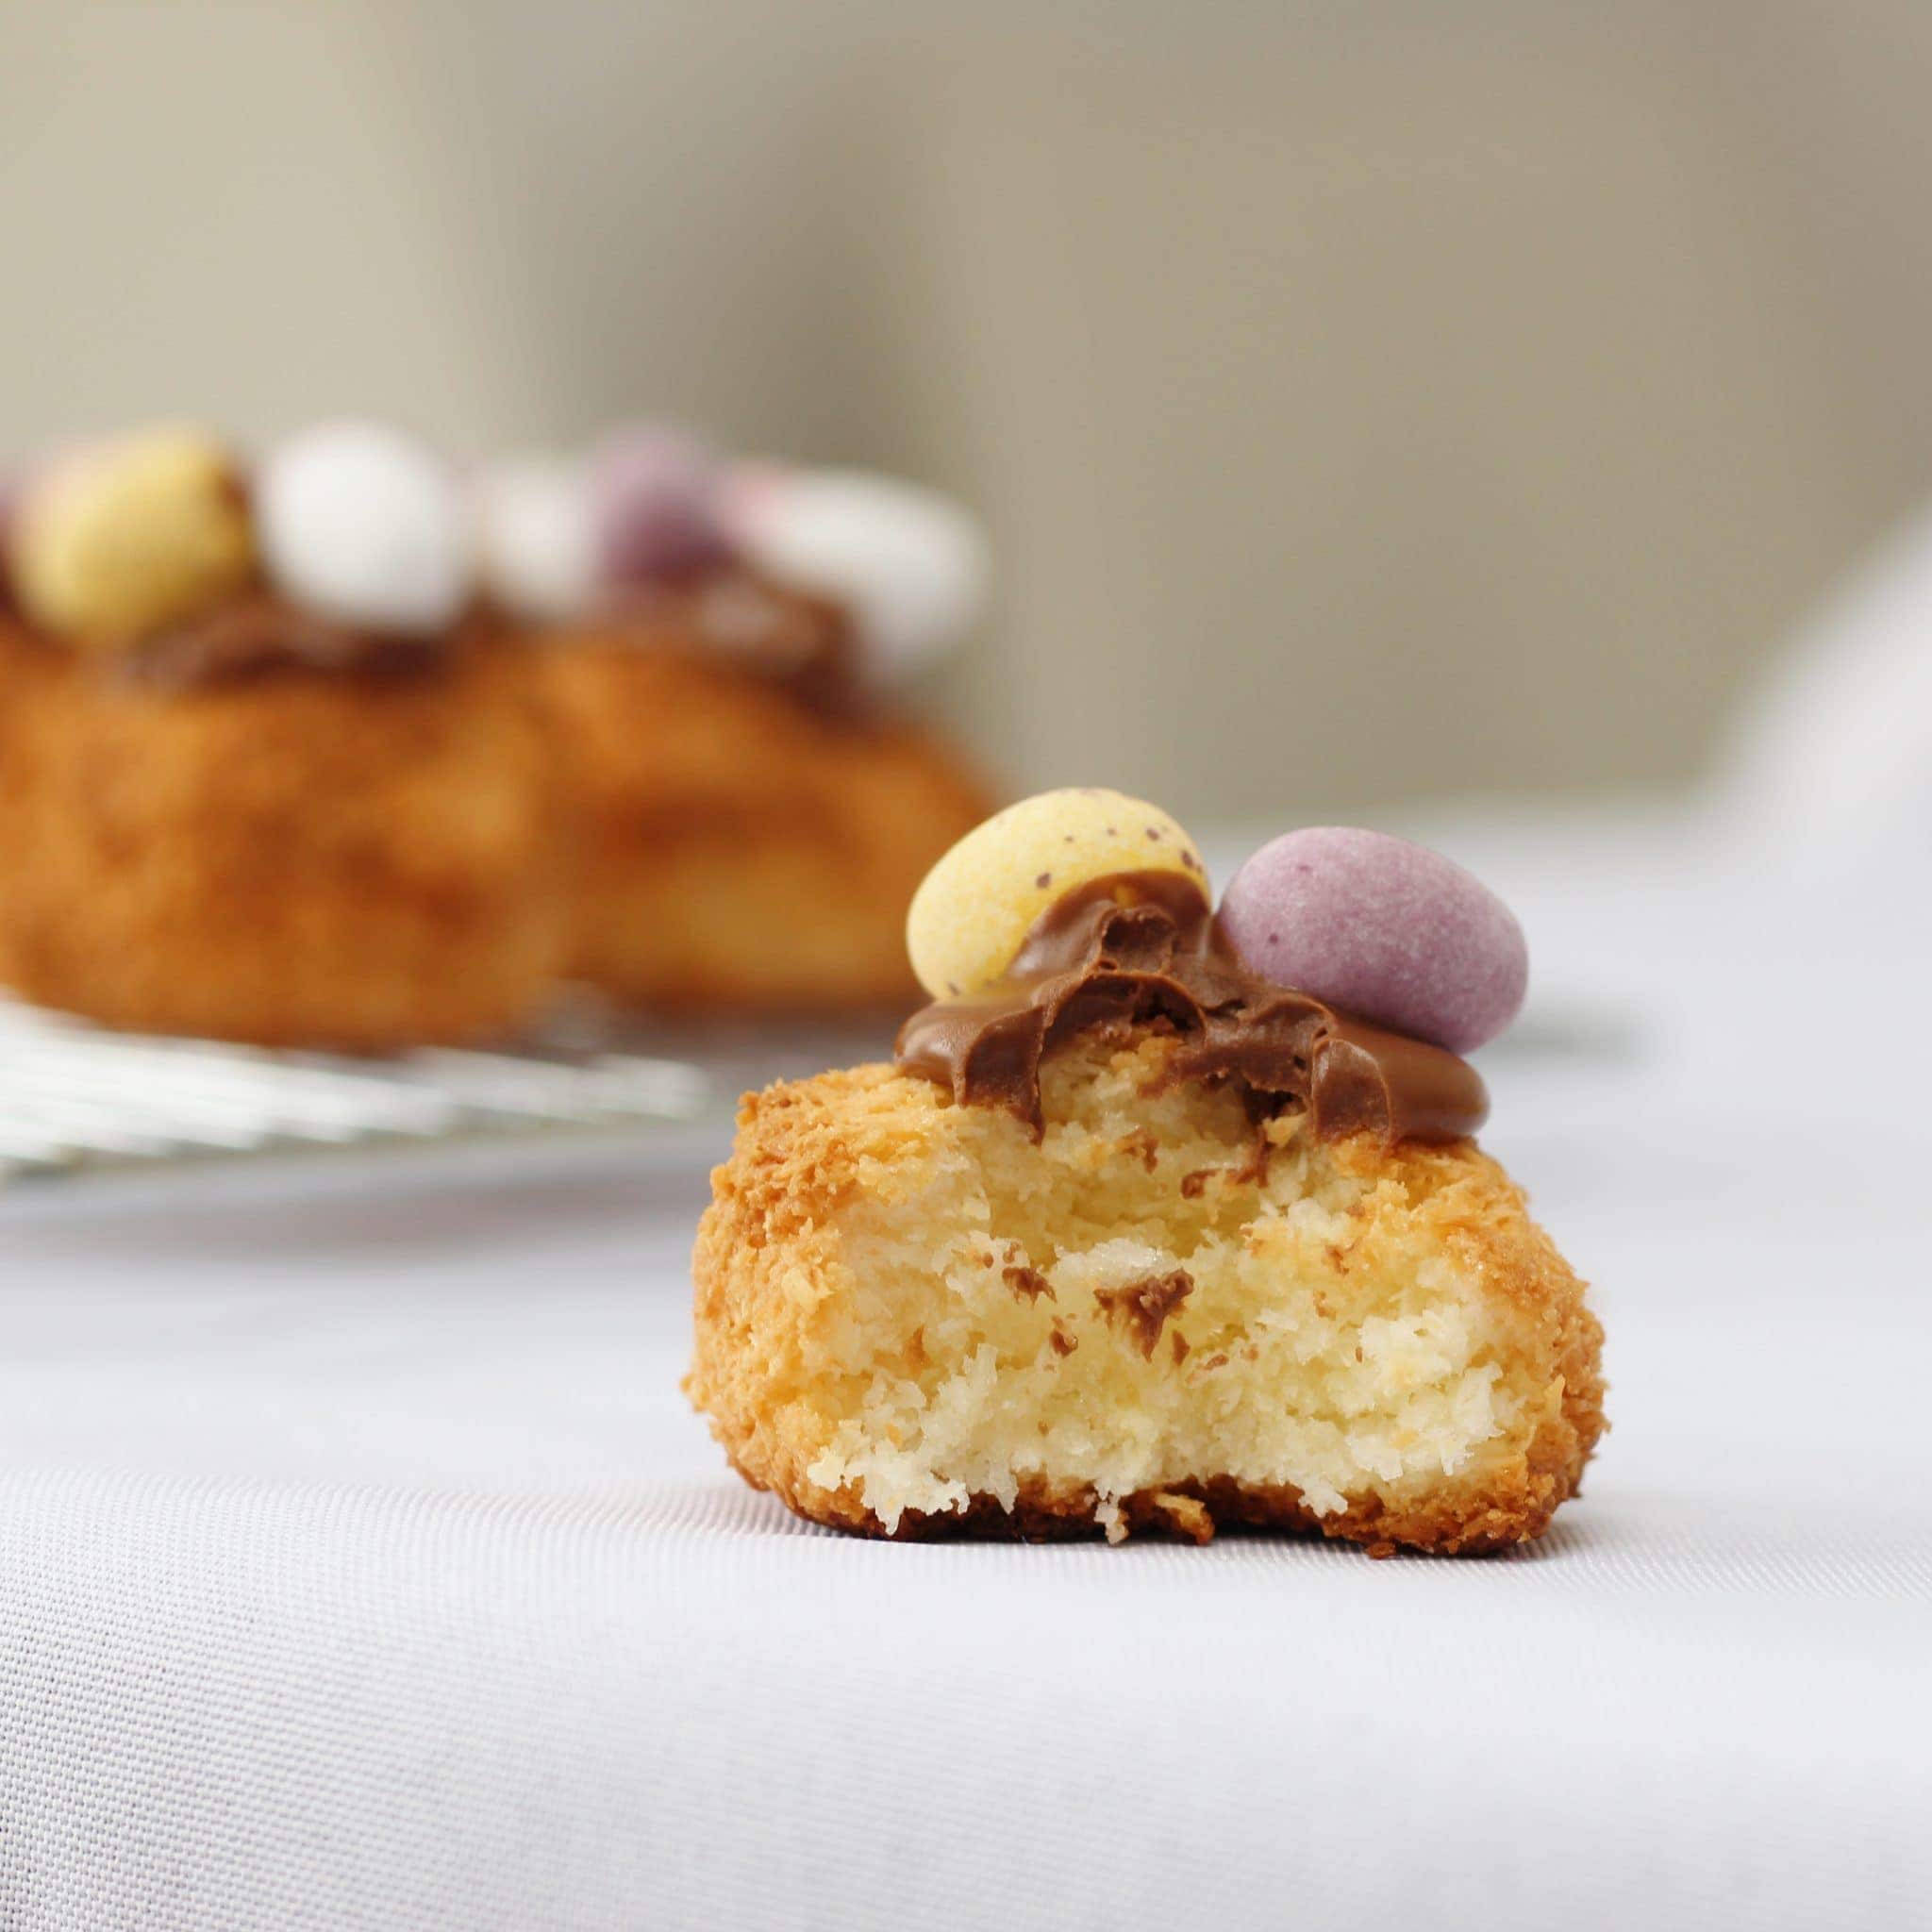 Coconut Macaroons topped with melted chocolate and mini eggs. An easy Easter bake